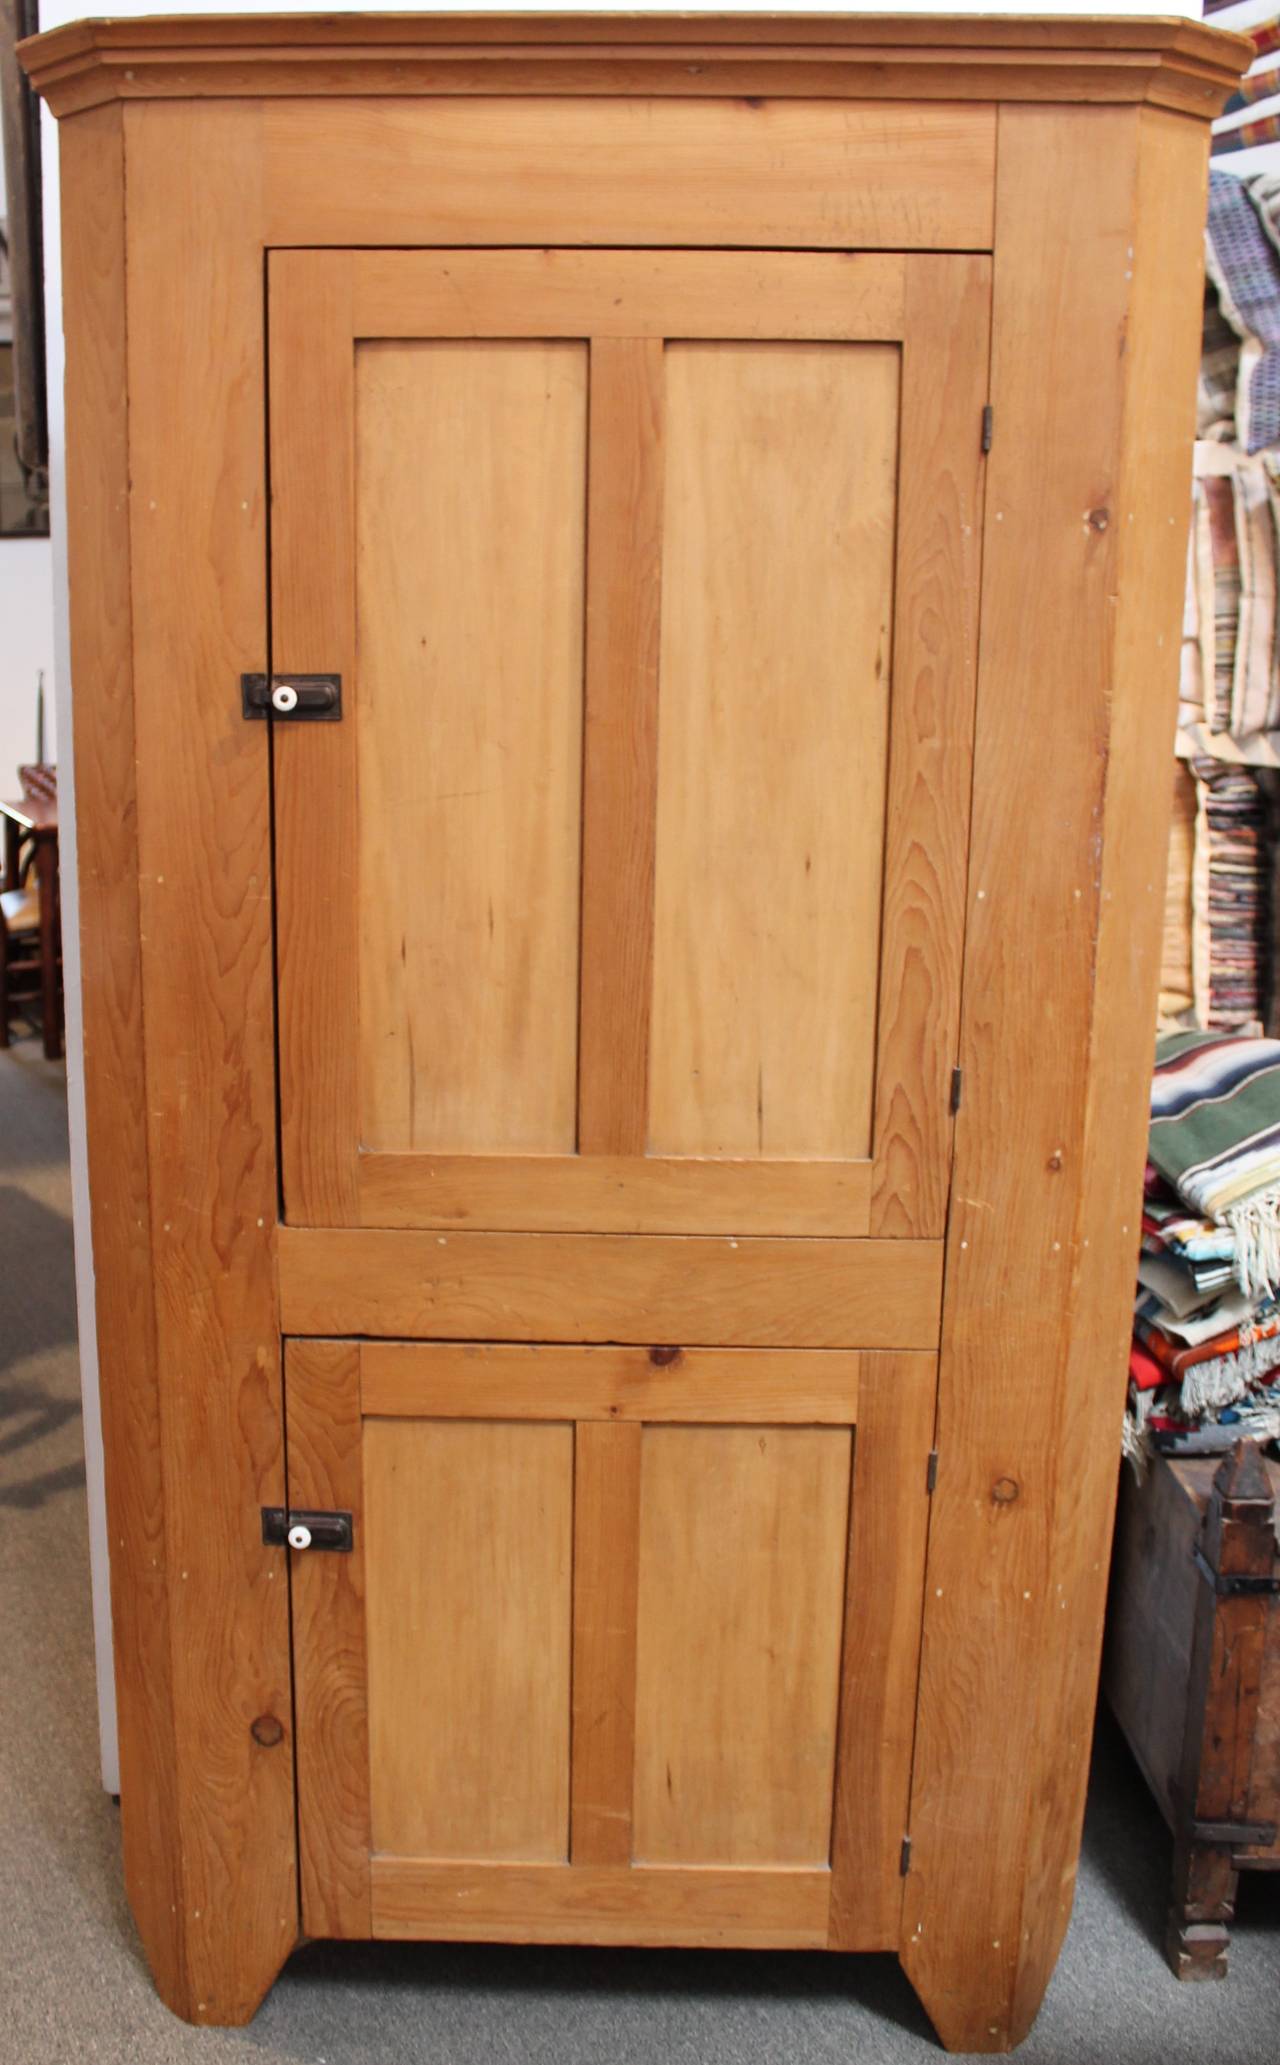 This finely made 19th century Pennsylvania pine two-door corner cupboard is in wonderful as found condition. It has all original hardware and wonderful cut-out feet. The entire cupboard is early square nails and wood peg construction. The backboards